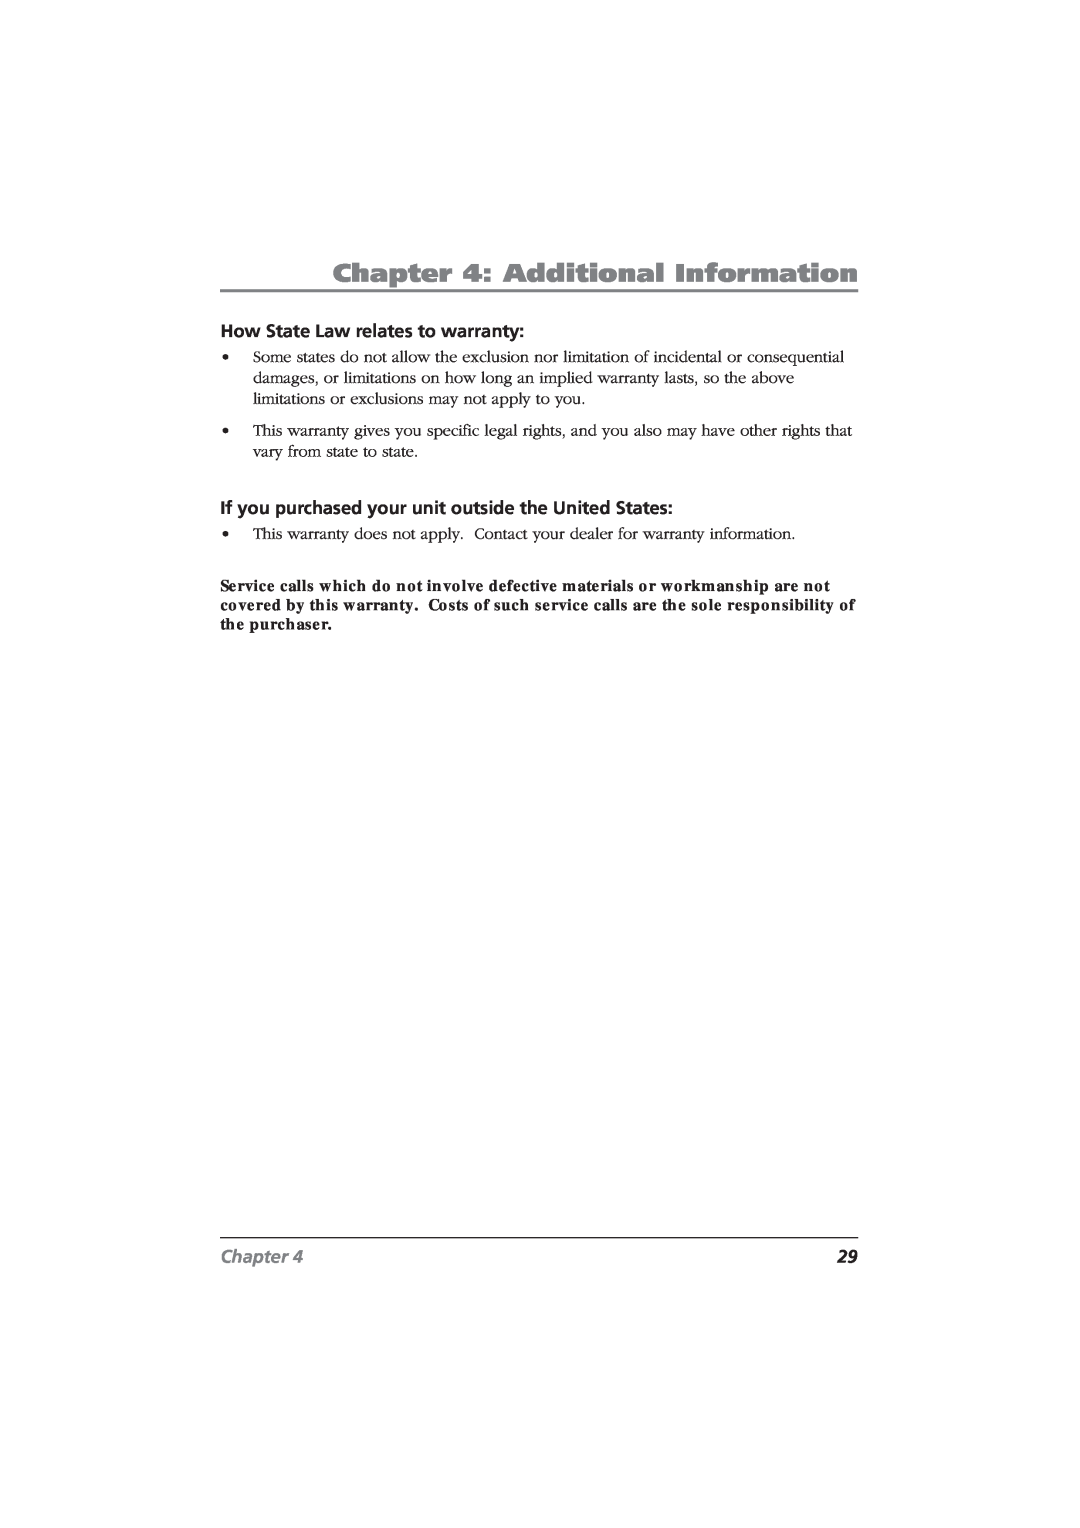 RCA CDRW10 manual Additional Information, How State Law relates to warranty, Chapter 